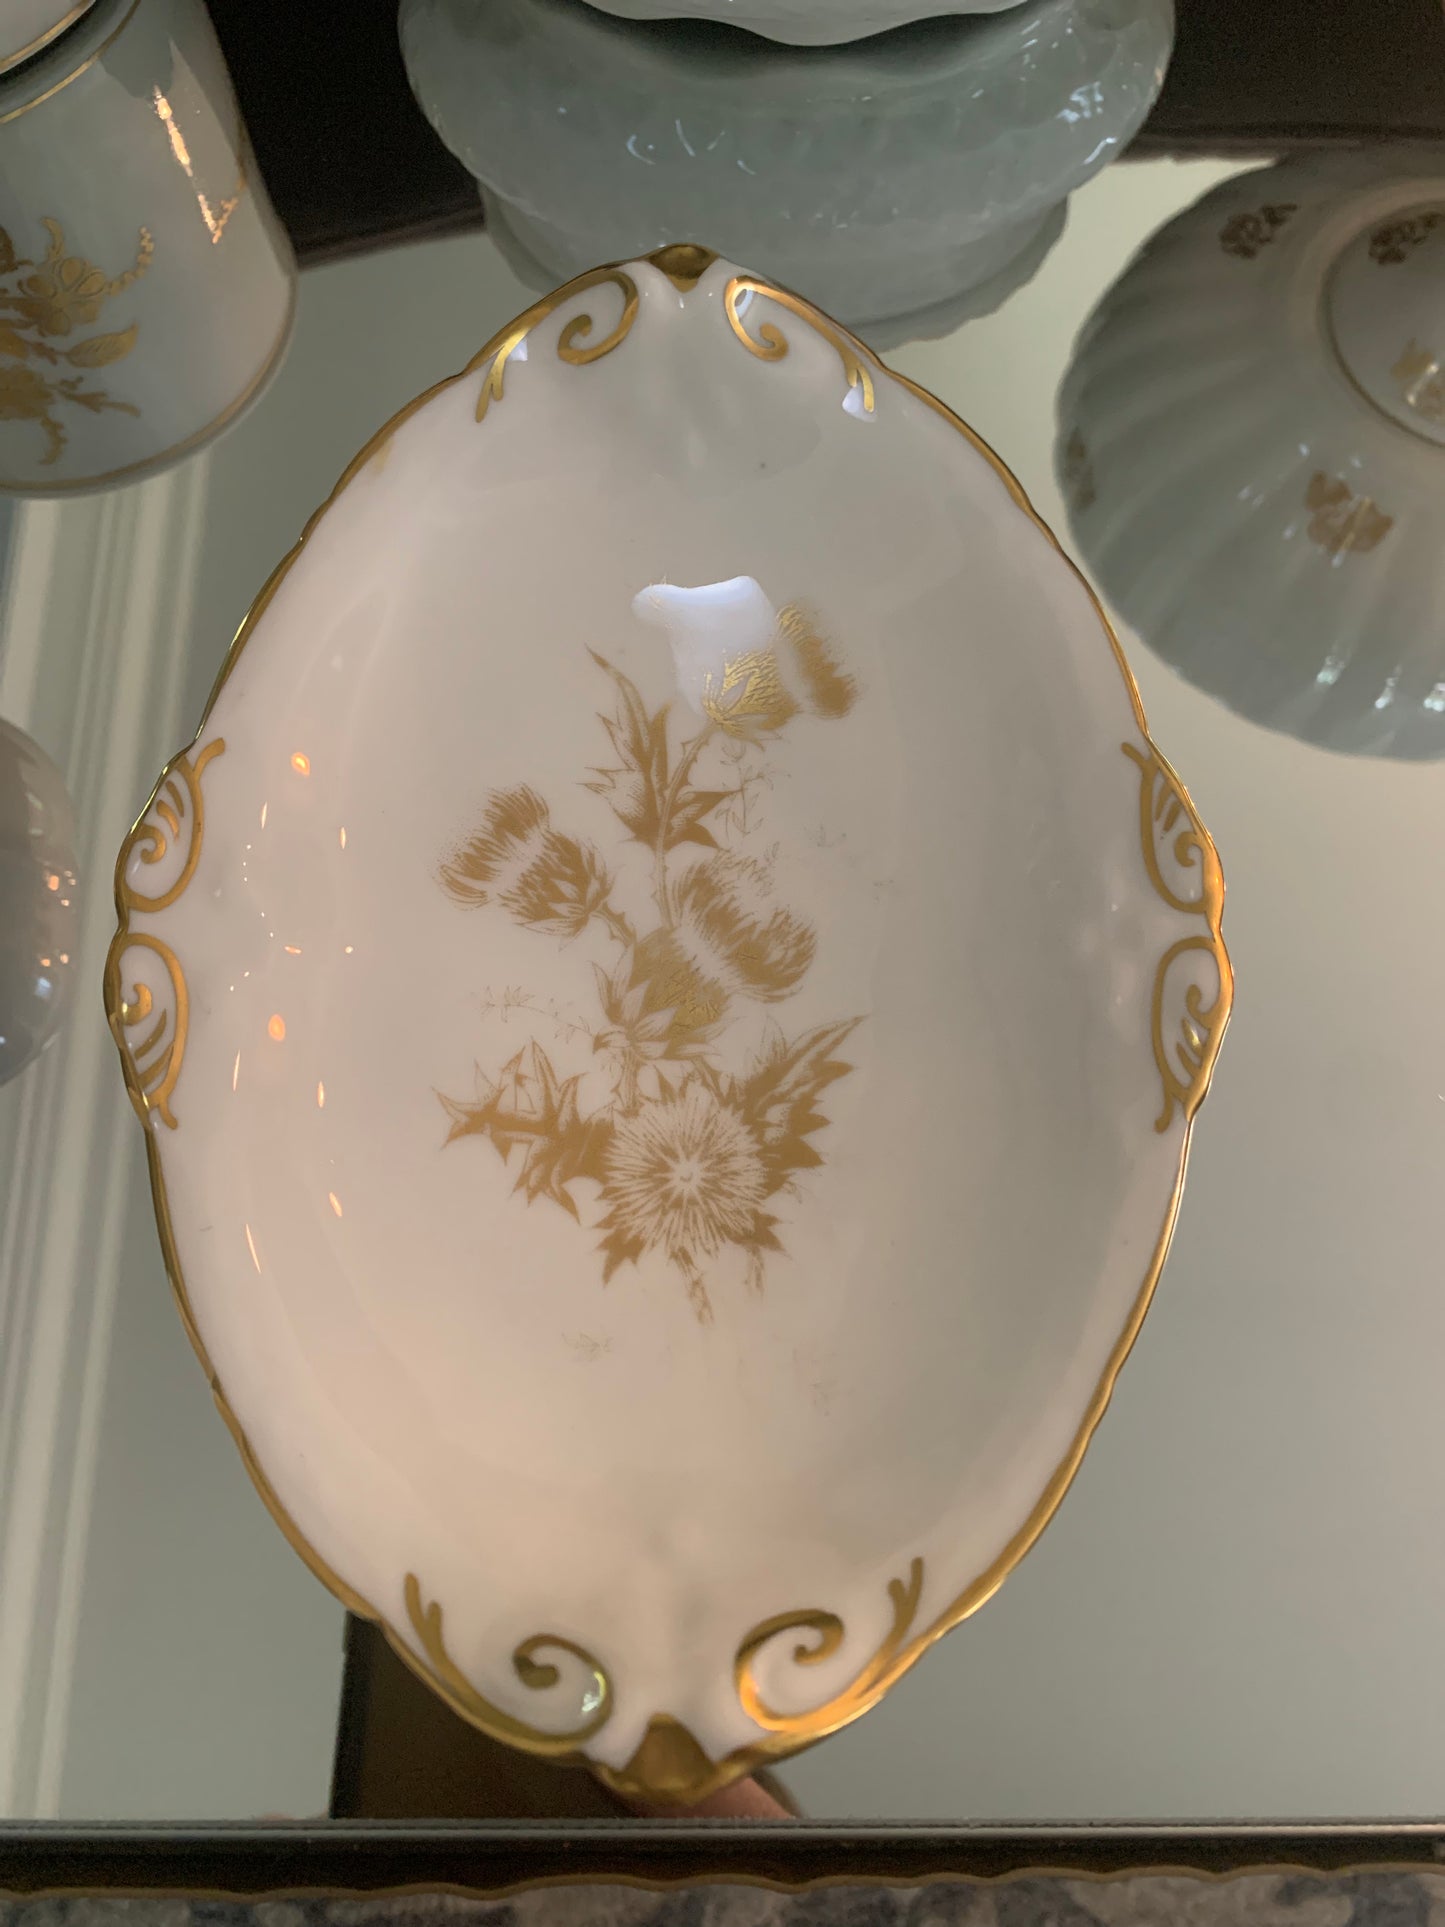 Vintage Hammersley & Co Bone China Gilded Dish with Thistle design